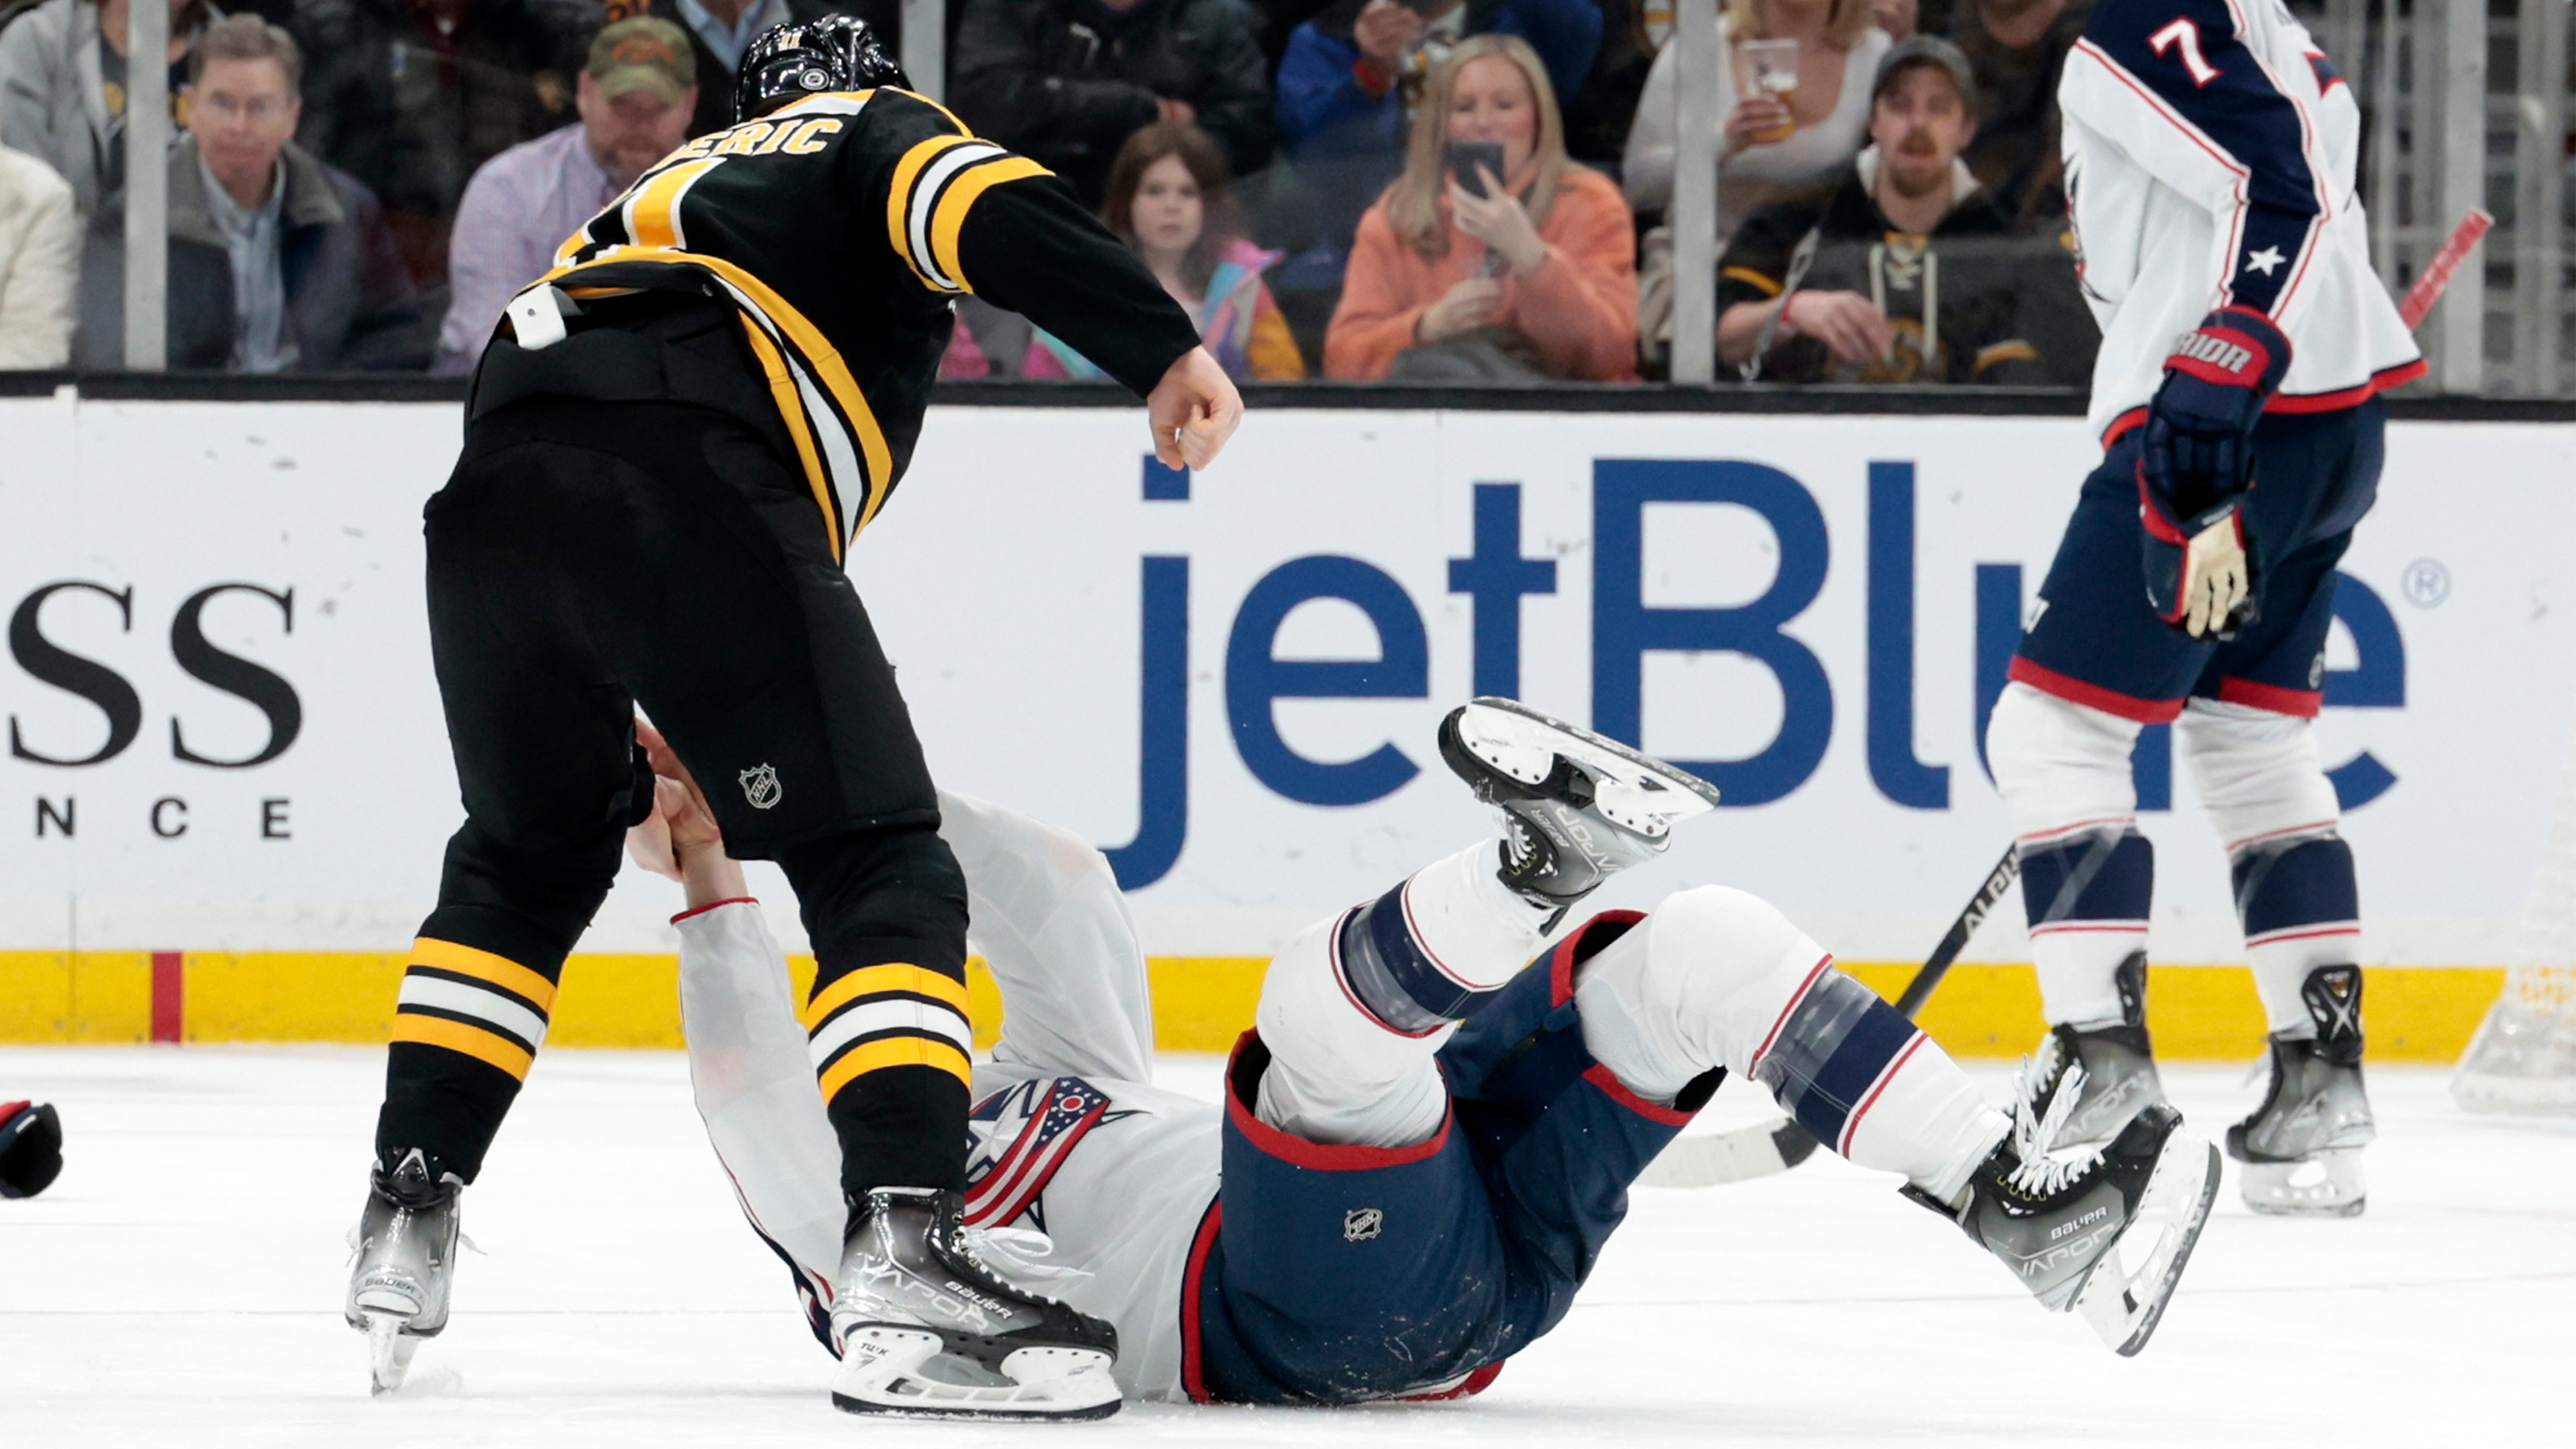 Boston Bruins Winger Could Hit Another Gear And Take Off